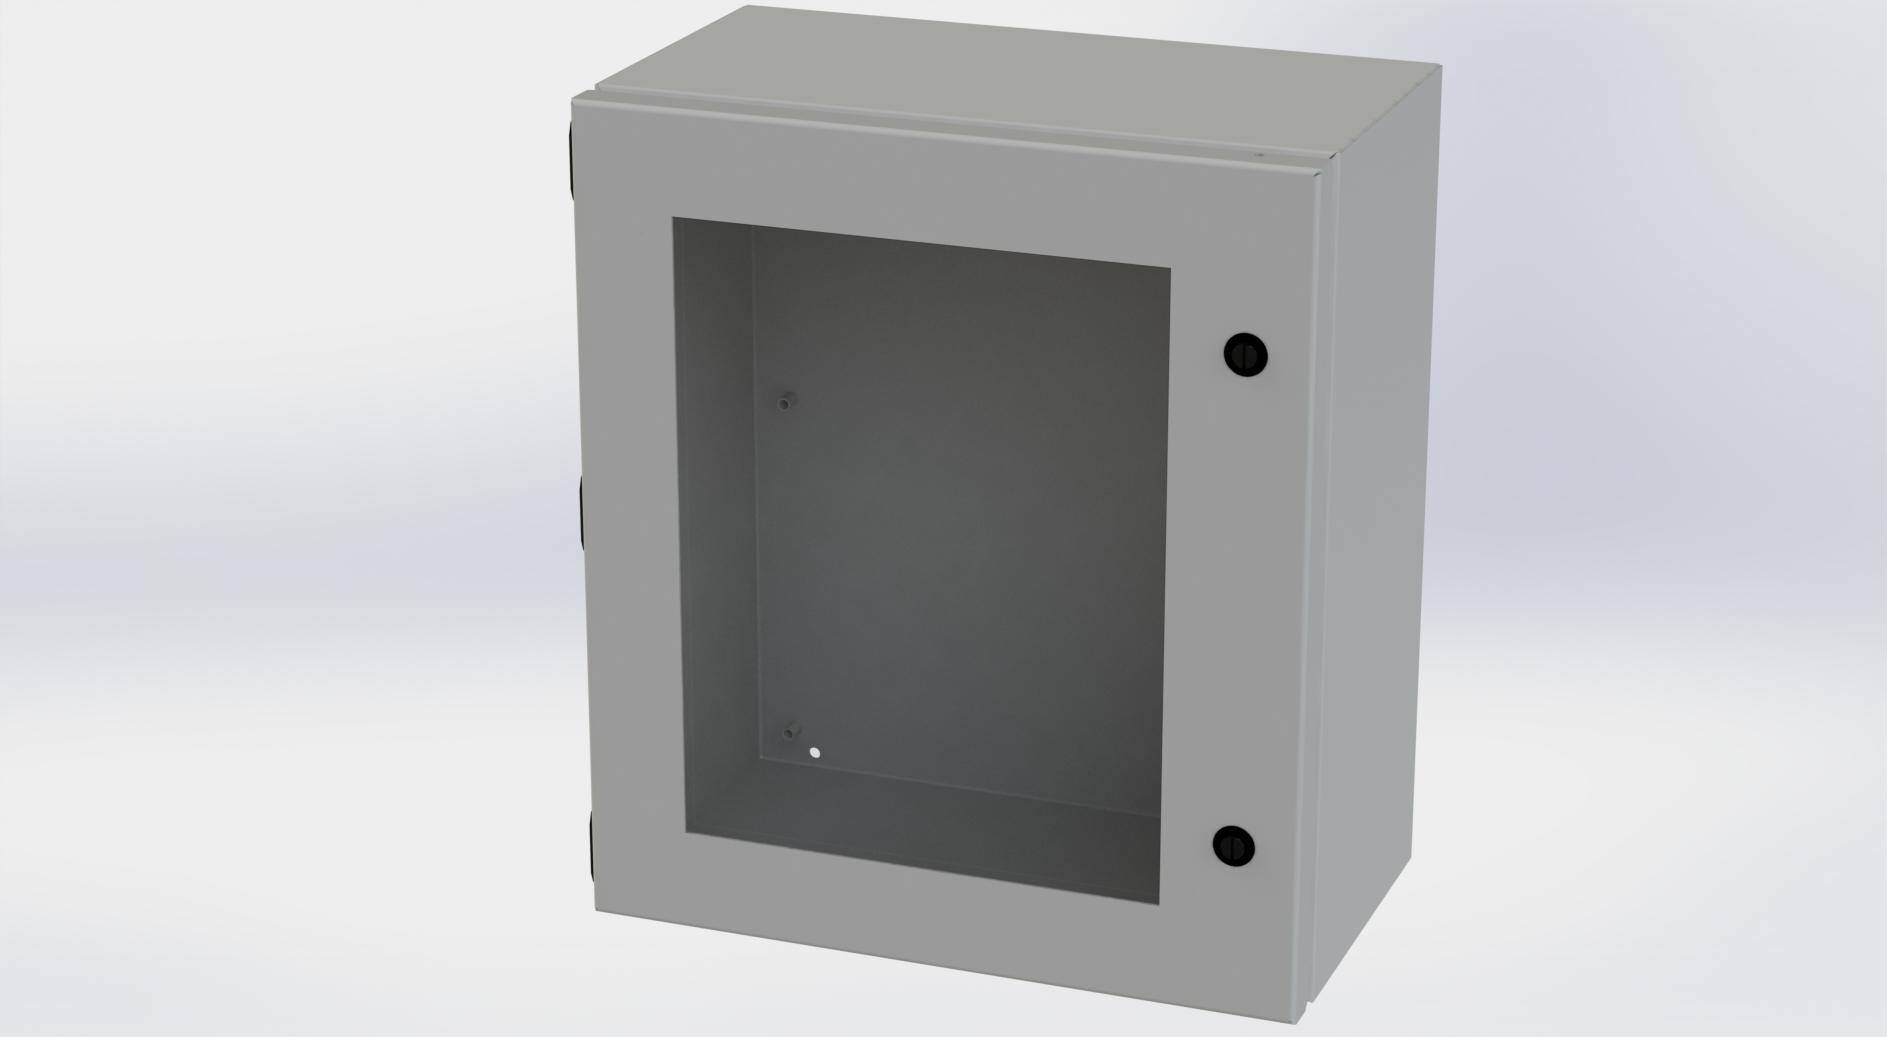 Saginaw Control SCE-16148ELJW ELJ Enclosure W/Viewing Window, Height:16.00", Width:14.00", Depth:8.00", ANSI-61 gray powder coating inside and out. Optional sub-panels are powder coated white.